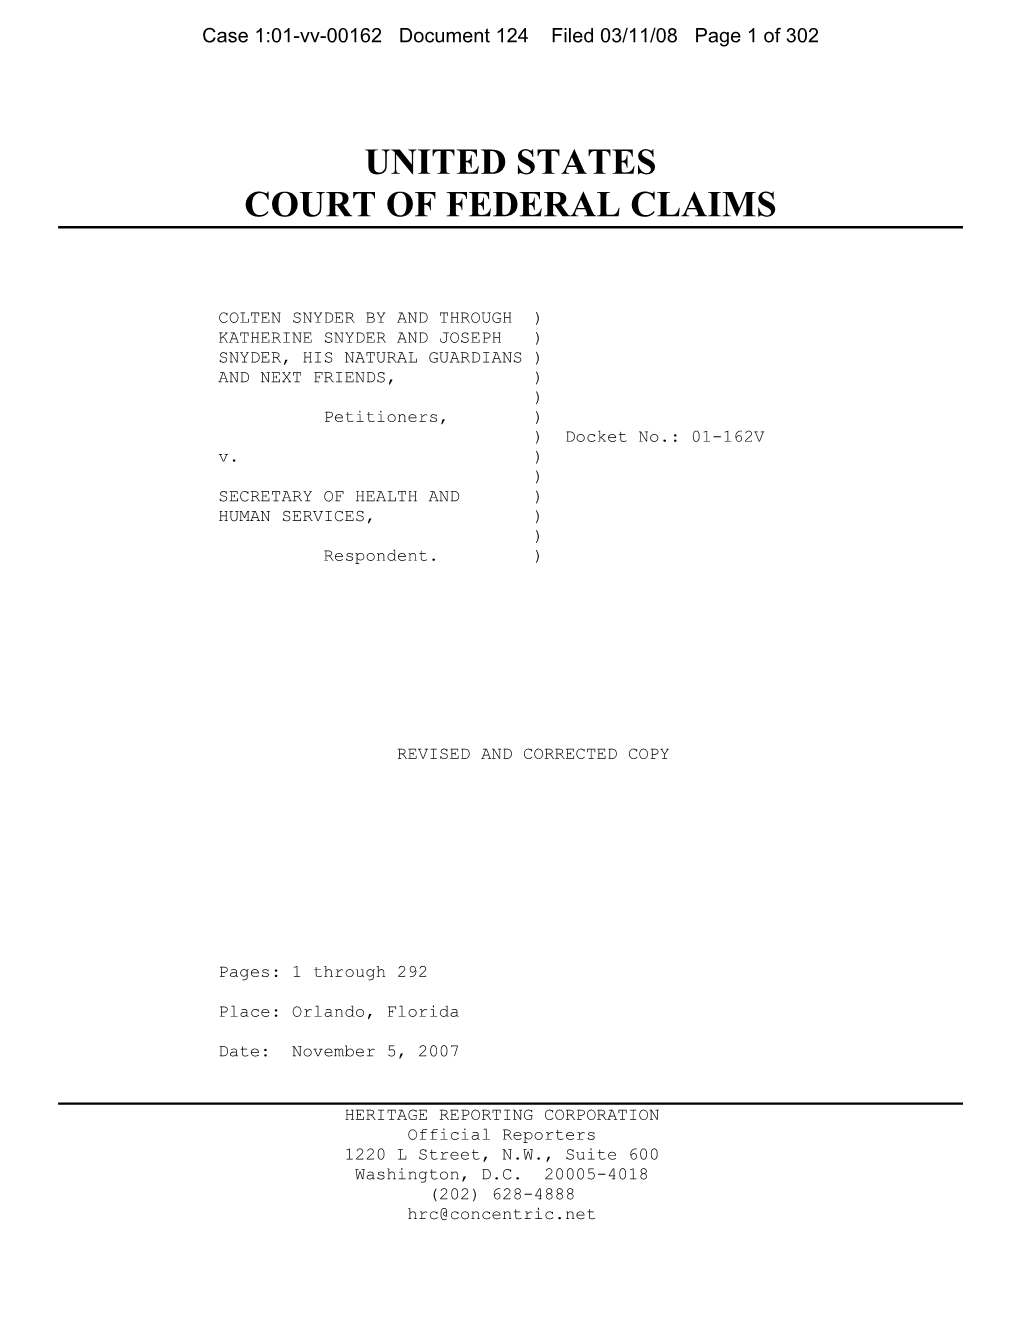 United States Court of Federal Claims